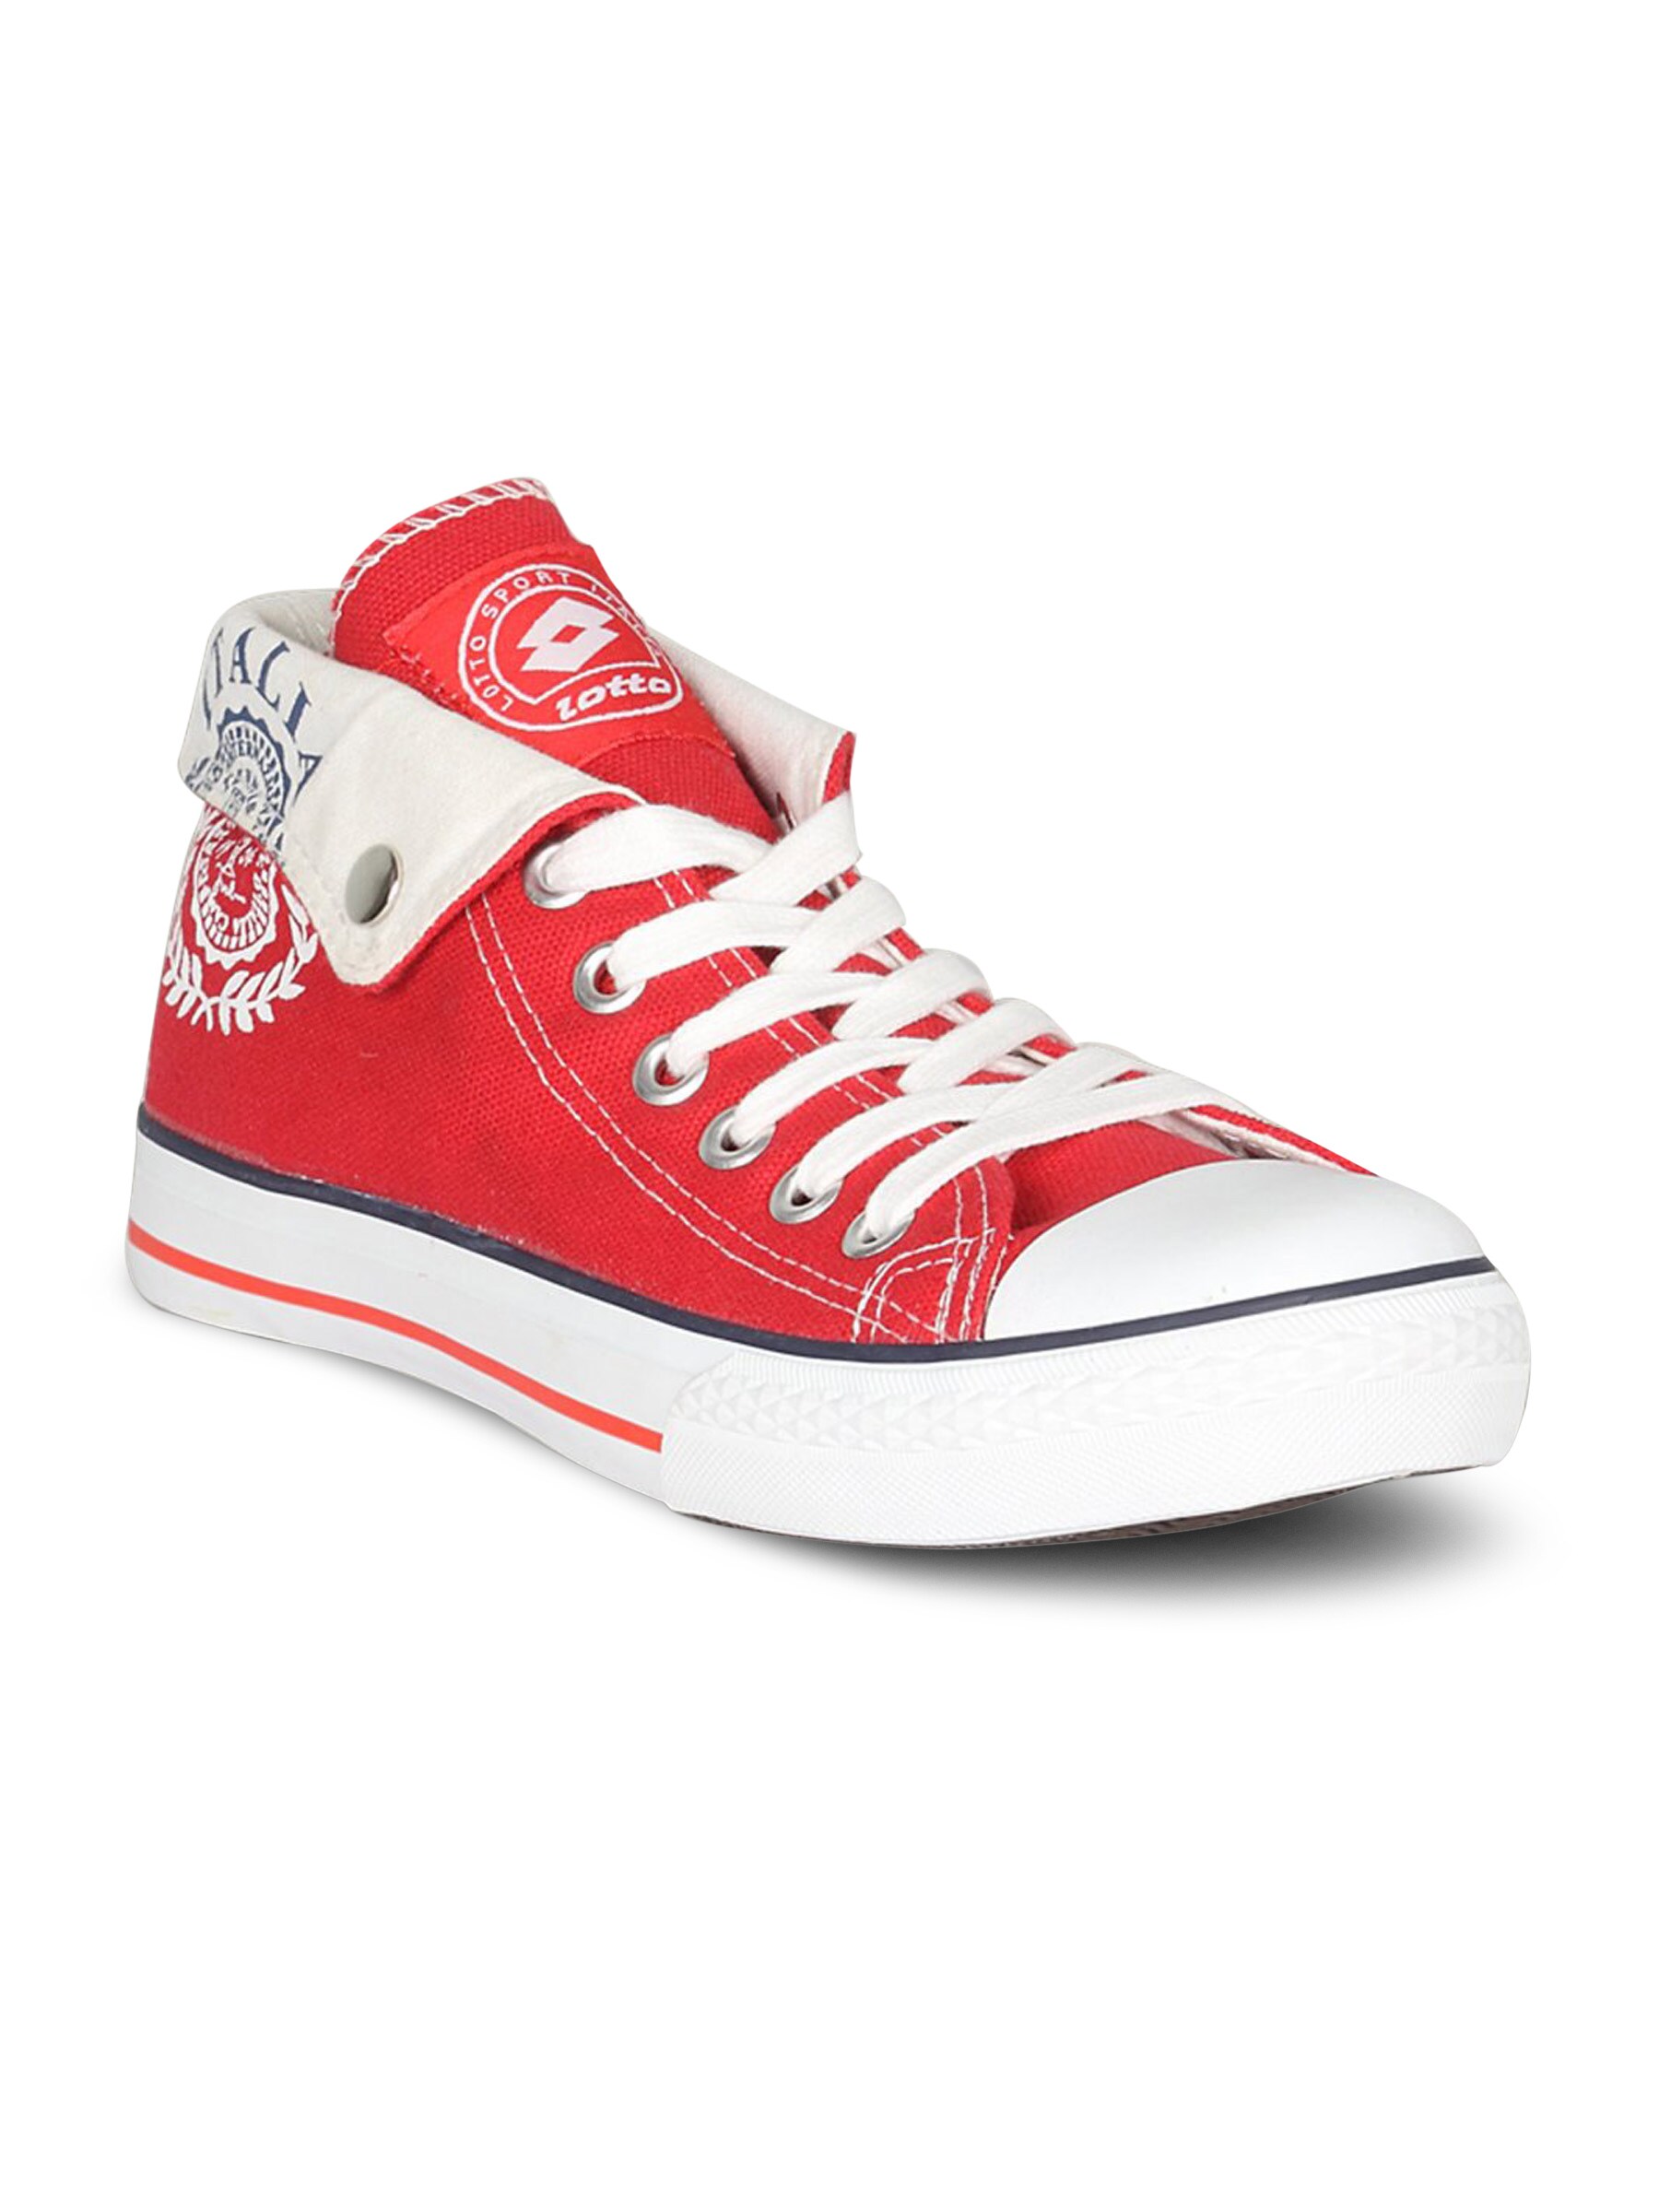 Lotto Unisex Canvas White Red Shoe